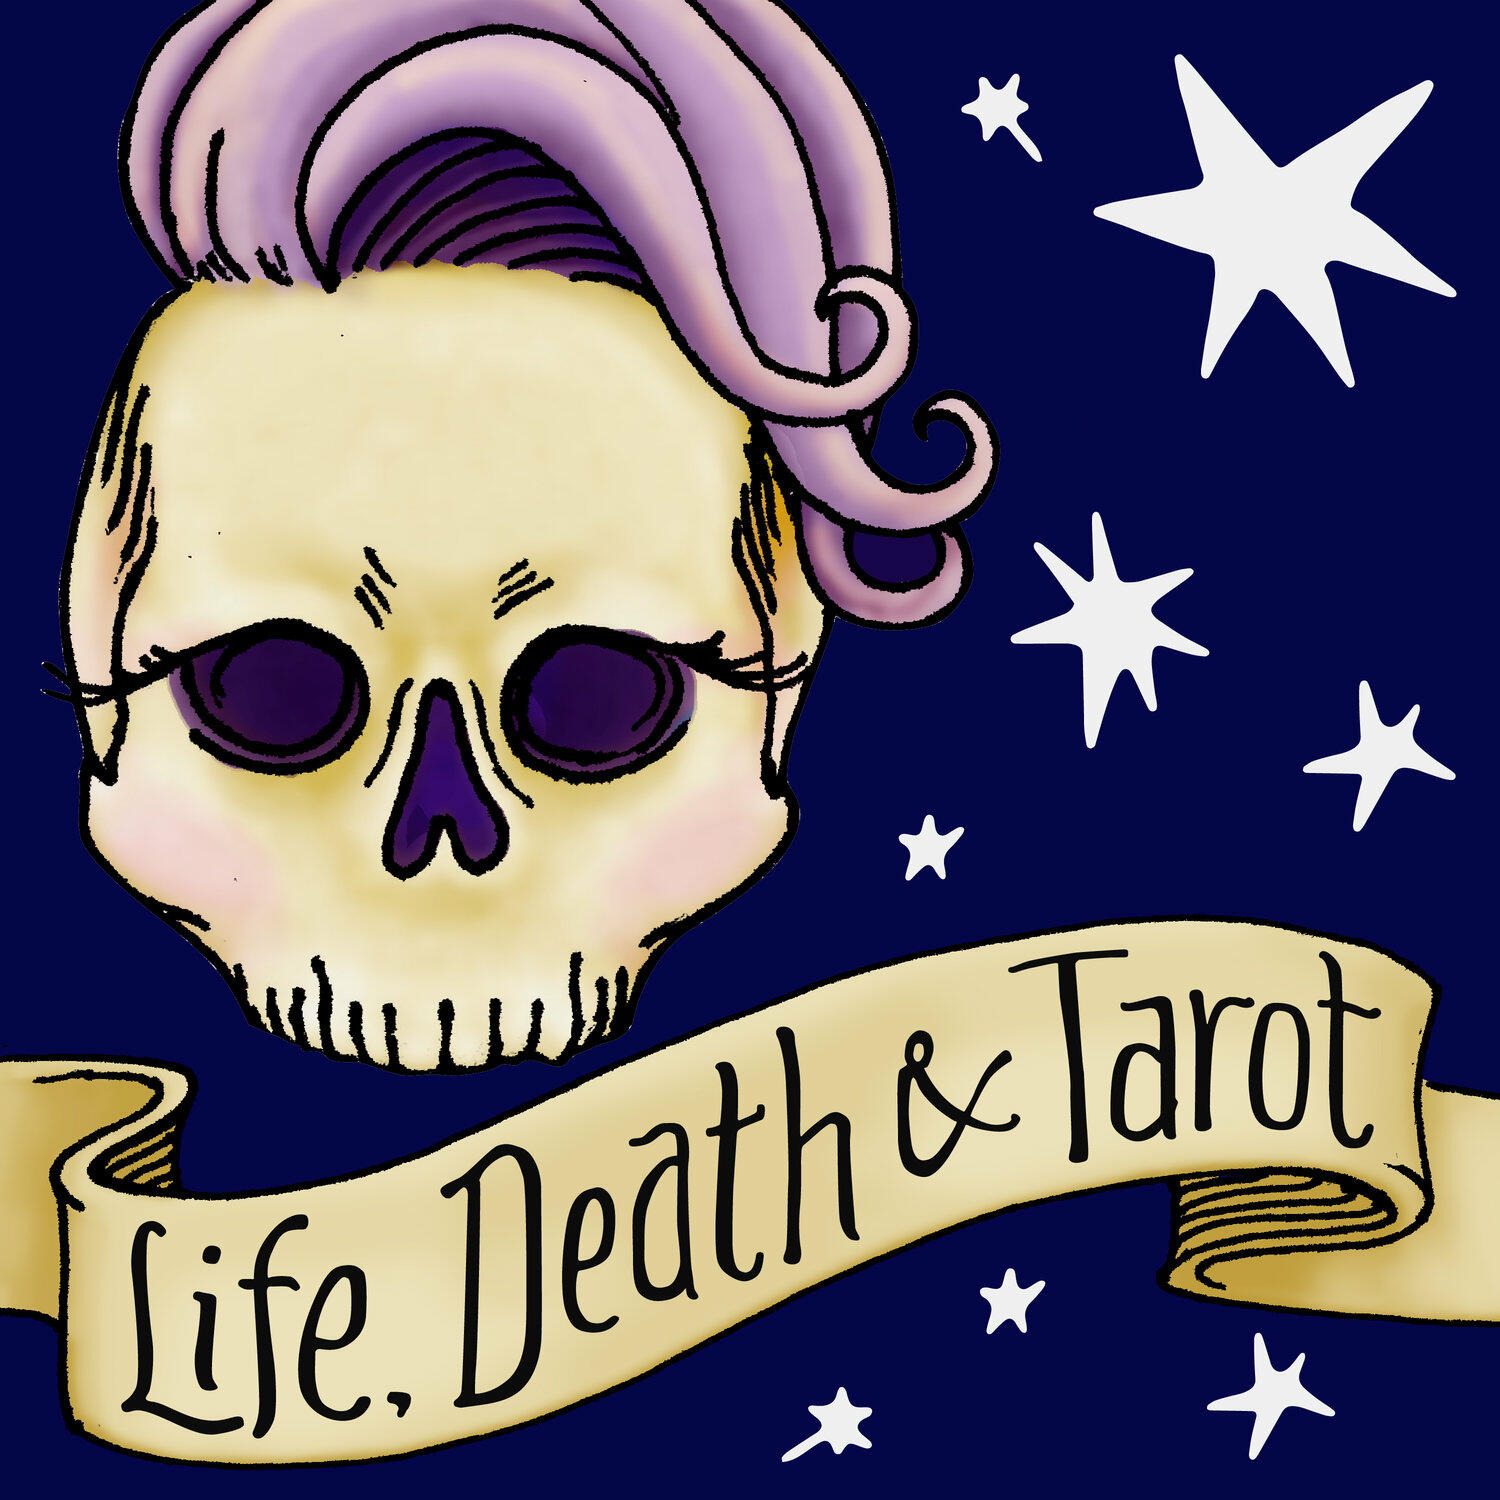 Life is dead. Life and Death. Life and Death Card.